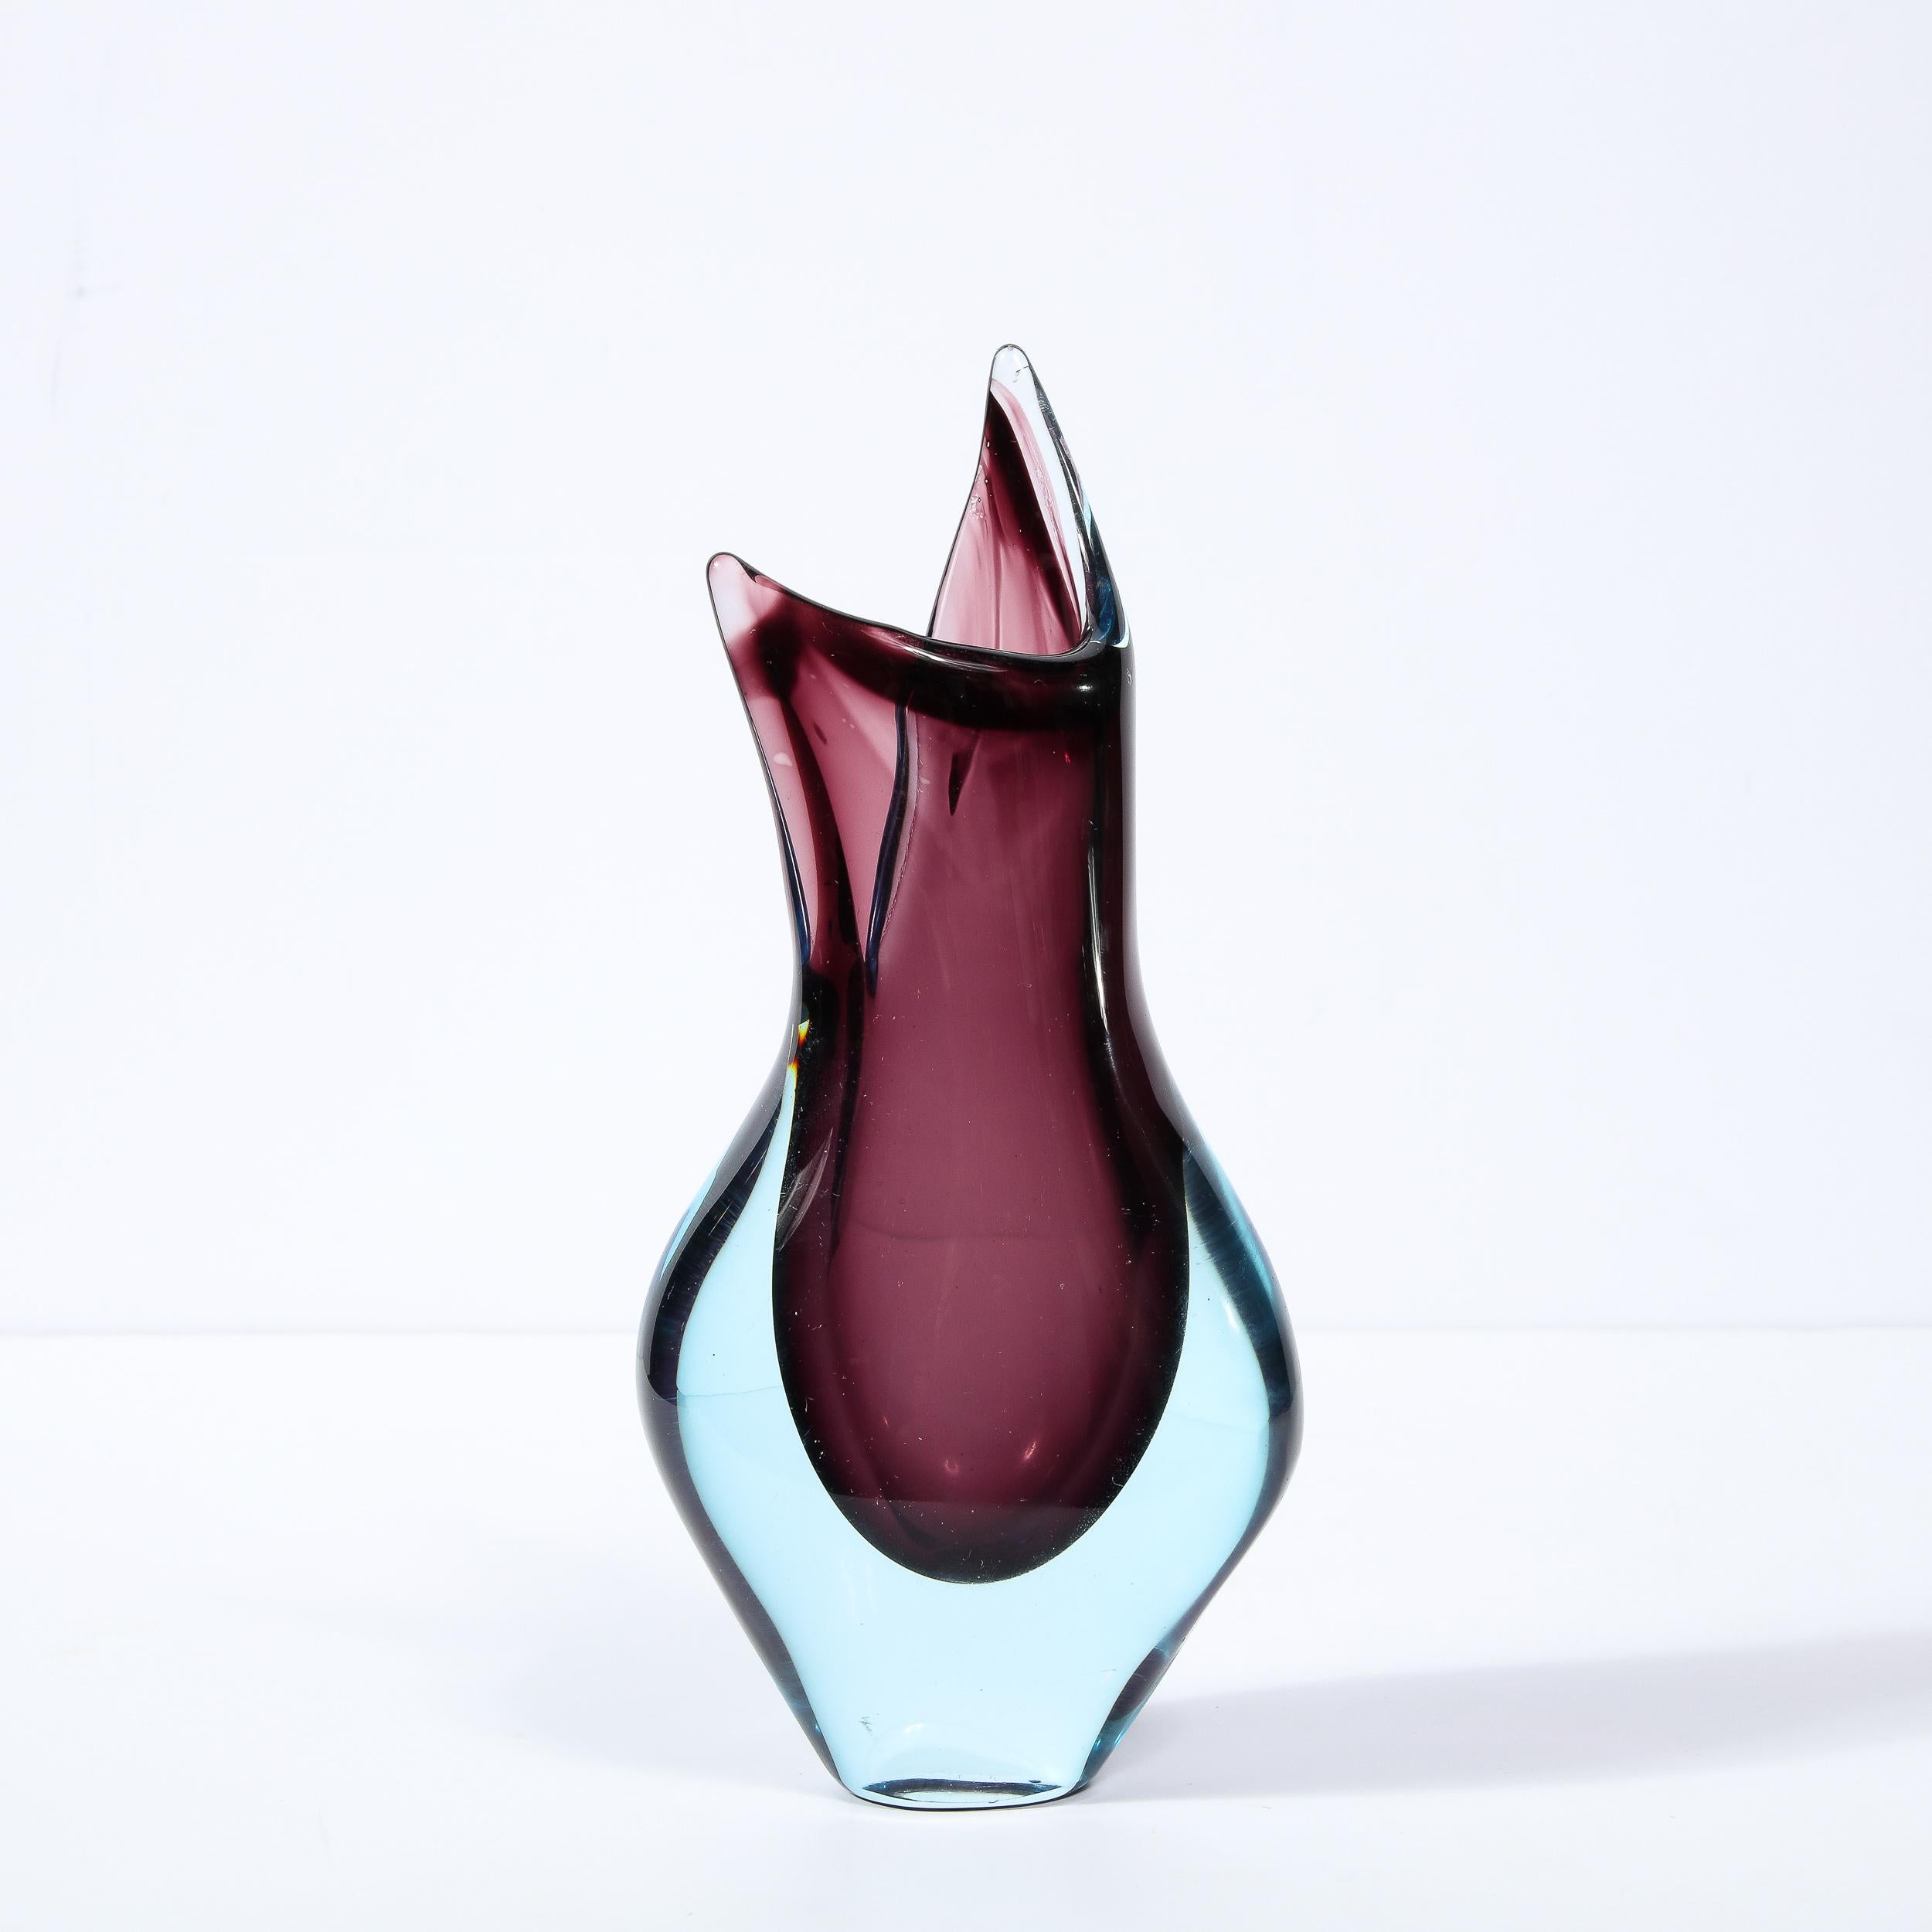 This elegant and graphic Mid-Century Modern vase was realized in Murano, Italy- the island off the coast of Venice renowned for centuries for its superlative glass production. It features an idiosyncratic, amorphic form that flares dramatically near